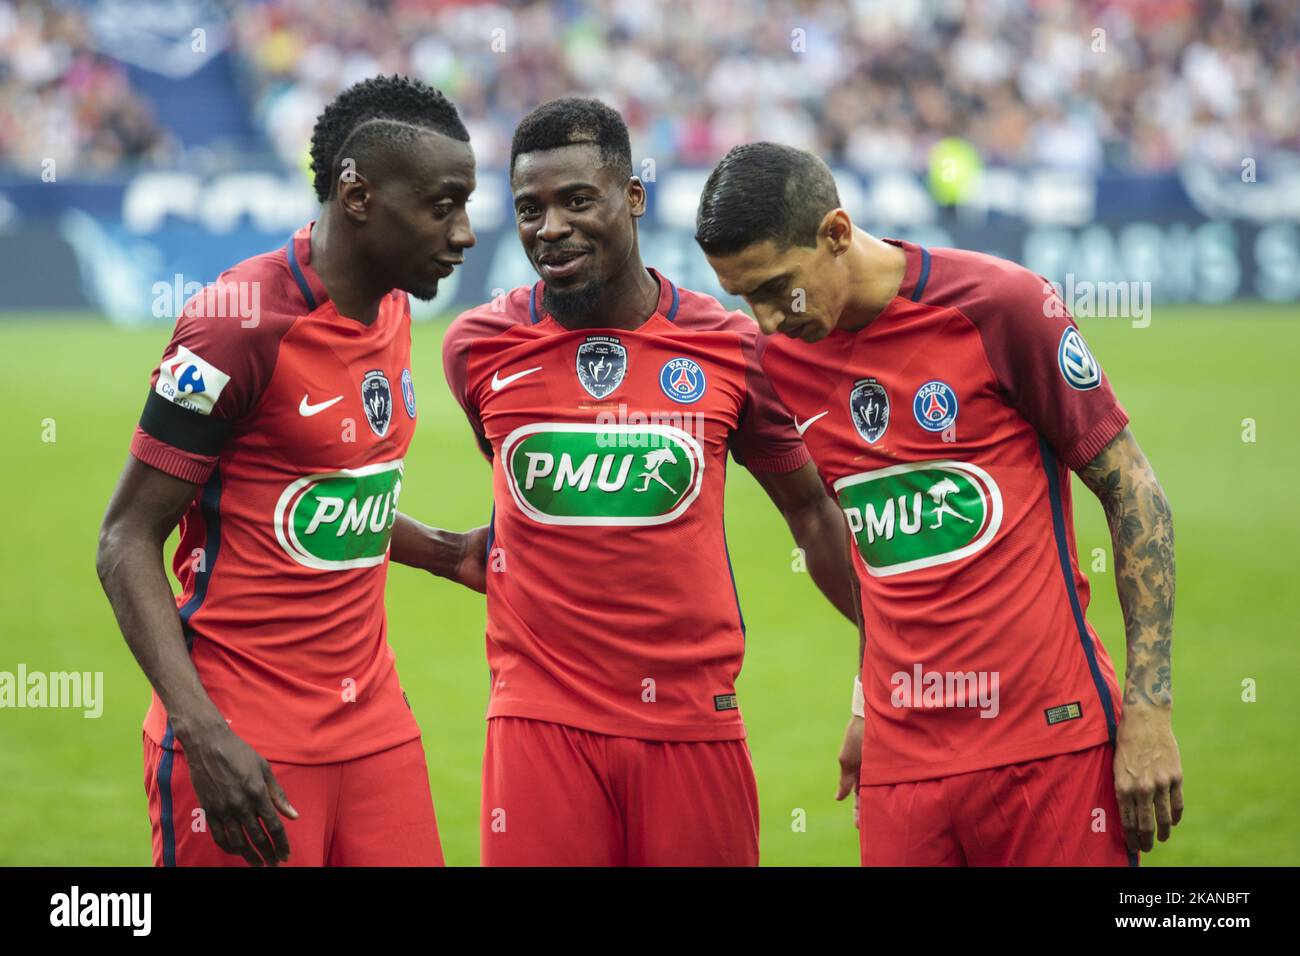 Paris Saint-Germain's French midfielder Blaise Matuidi (L), Paris Saint-Germain's Ivorian defender Serge Aurier (C) and Paris Saint-Germain's Argentinian forward Angel Di Maria (R) prior to the French Cup final football match between Paris Saint-Germain (PSG) and Angers (SCO) on May 27, 2017, at the Stade de France in Saint-Denis, north of Paris. (Photo by Geoffroy Van der Hasselt/NurPhoto) *** Please Use Credit from Credit Field *** Stock Photo